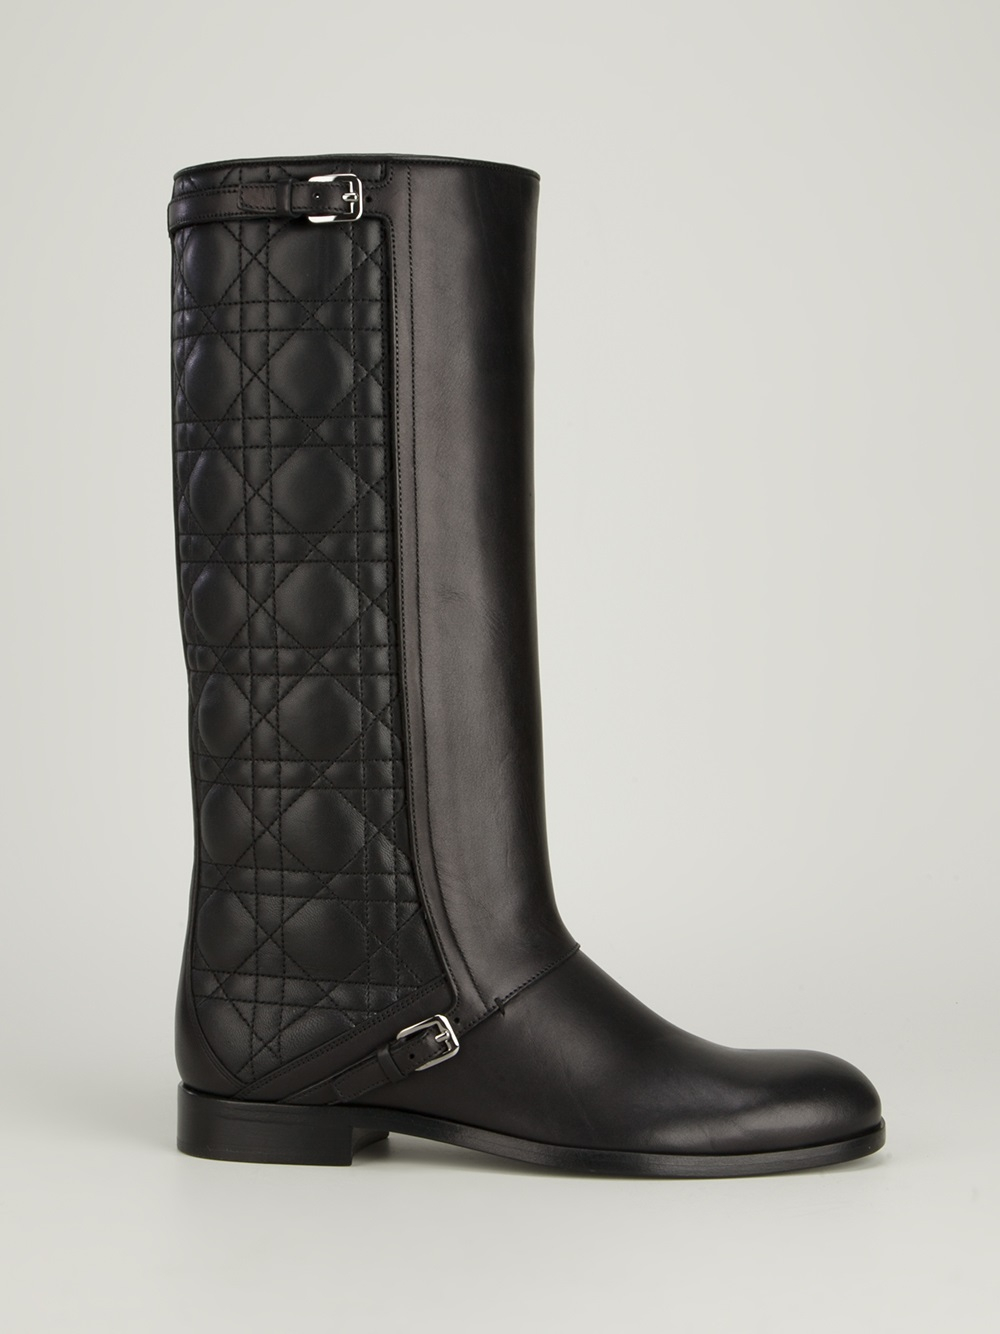 Lyst - Dior City Cannage Boot in Black